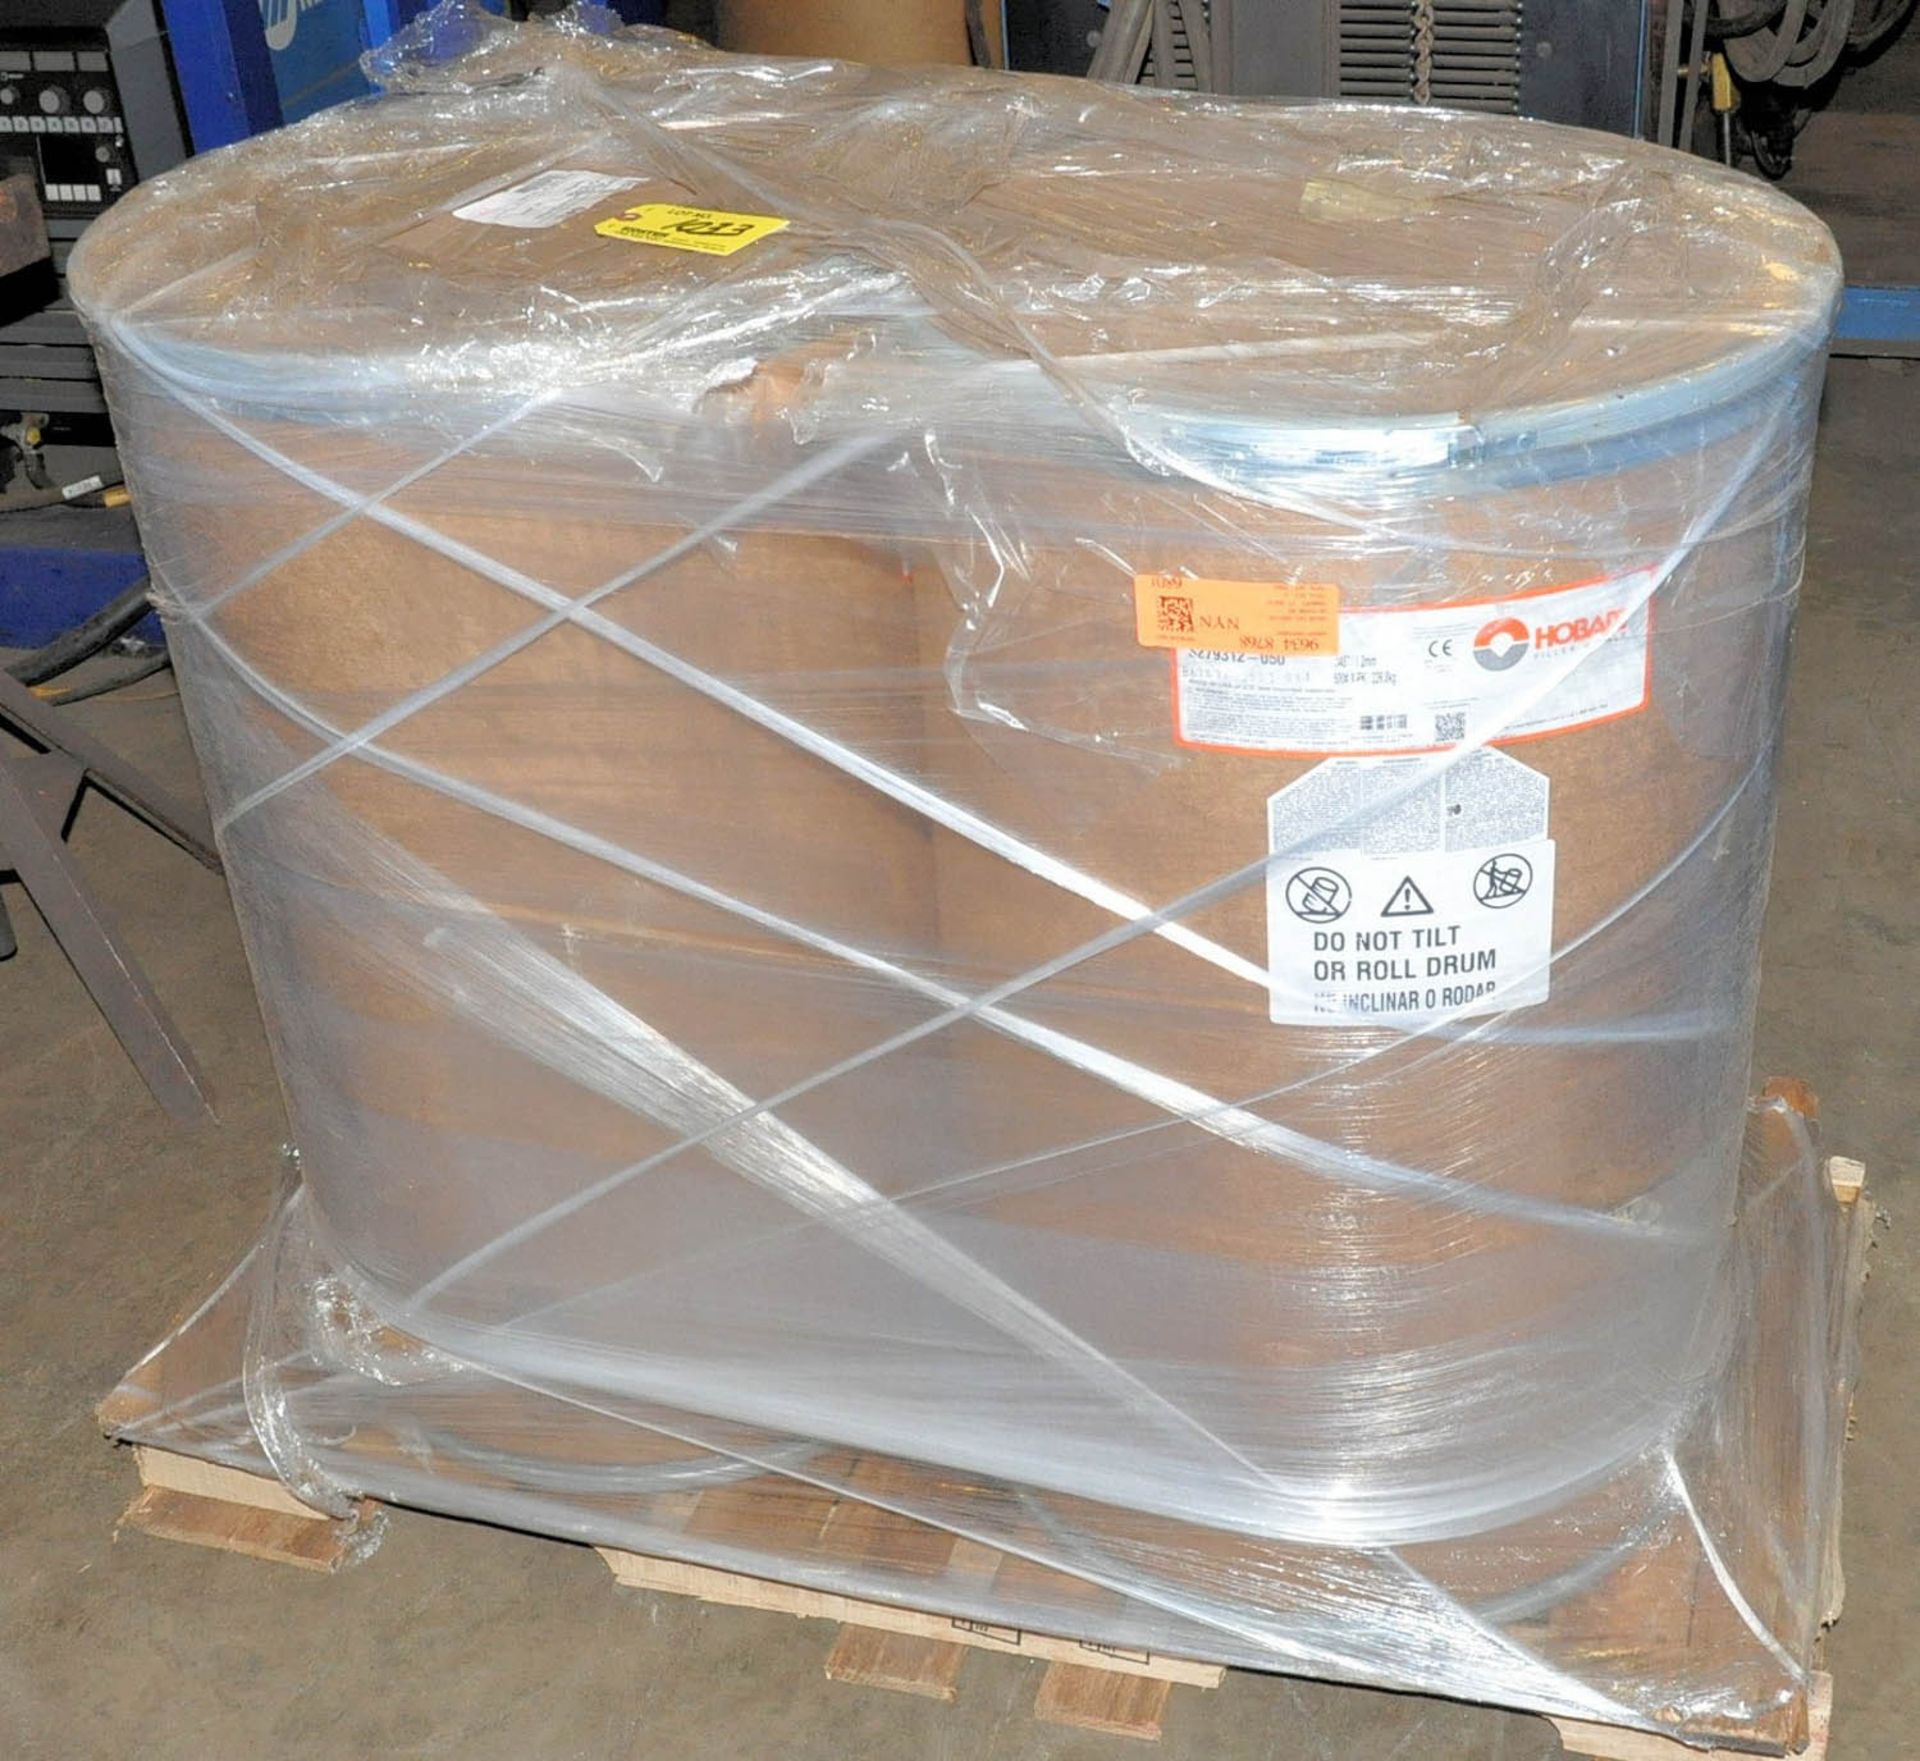 HOBART S279312-050, .045" CONTINUOUS WELDING WIRE IN (2) DRUMS ON (1) PALLET